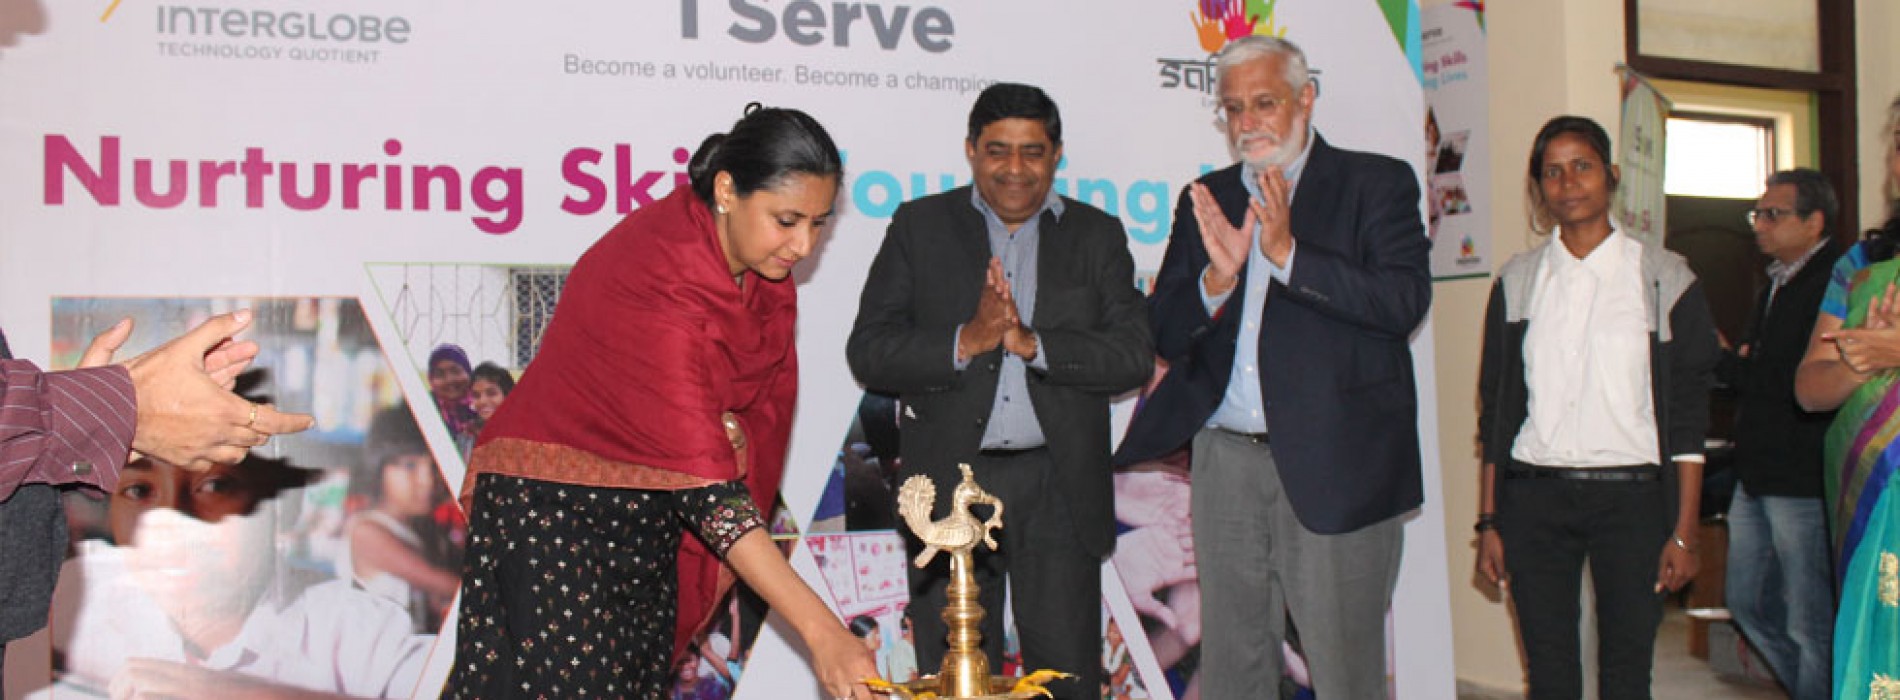 InterGlobe Technology Quotient and CAP Foundation launch a Skill Development Initiative